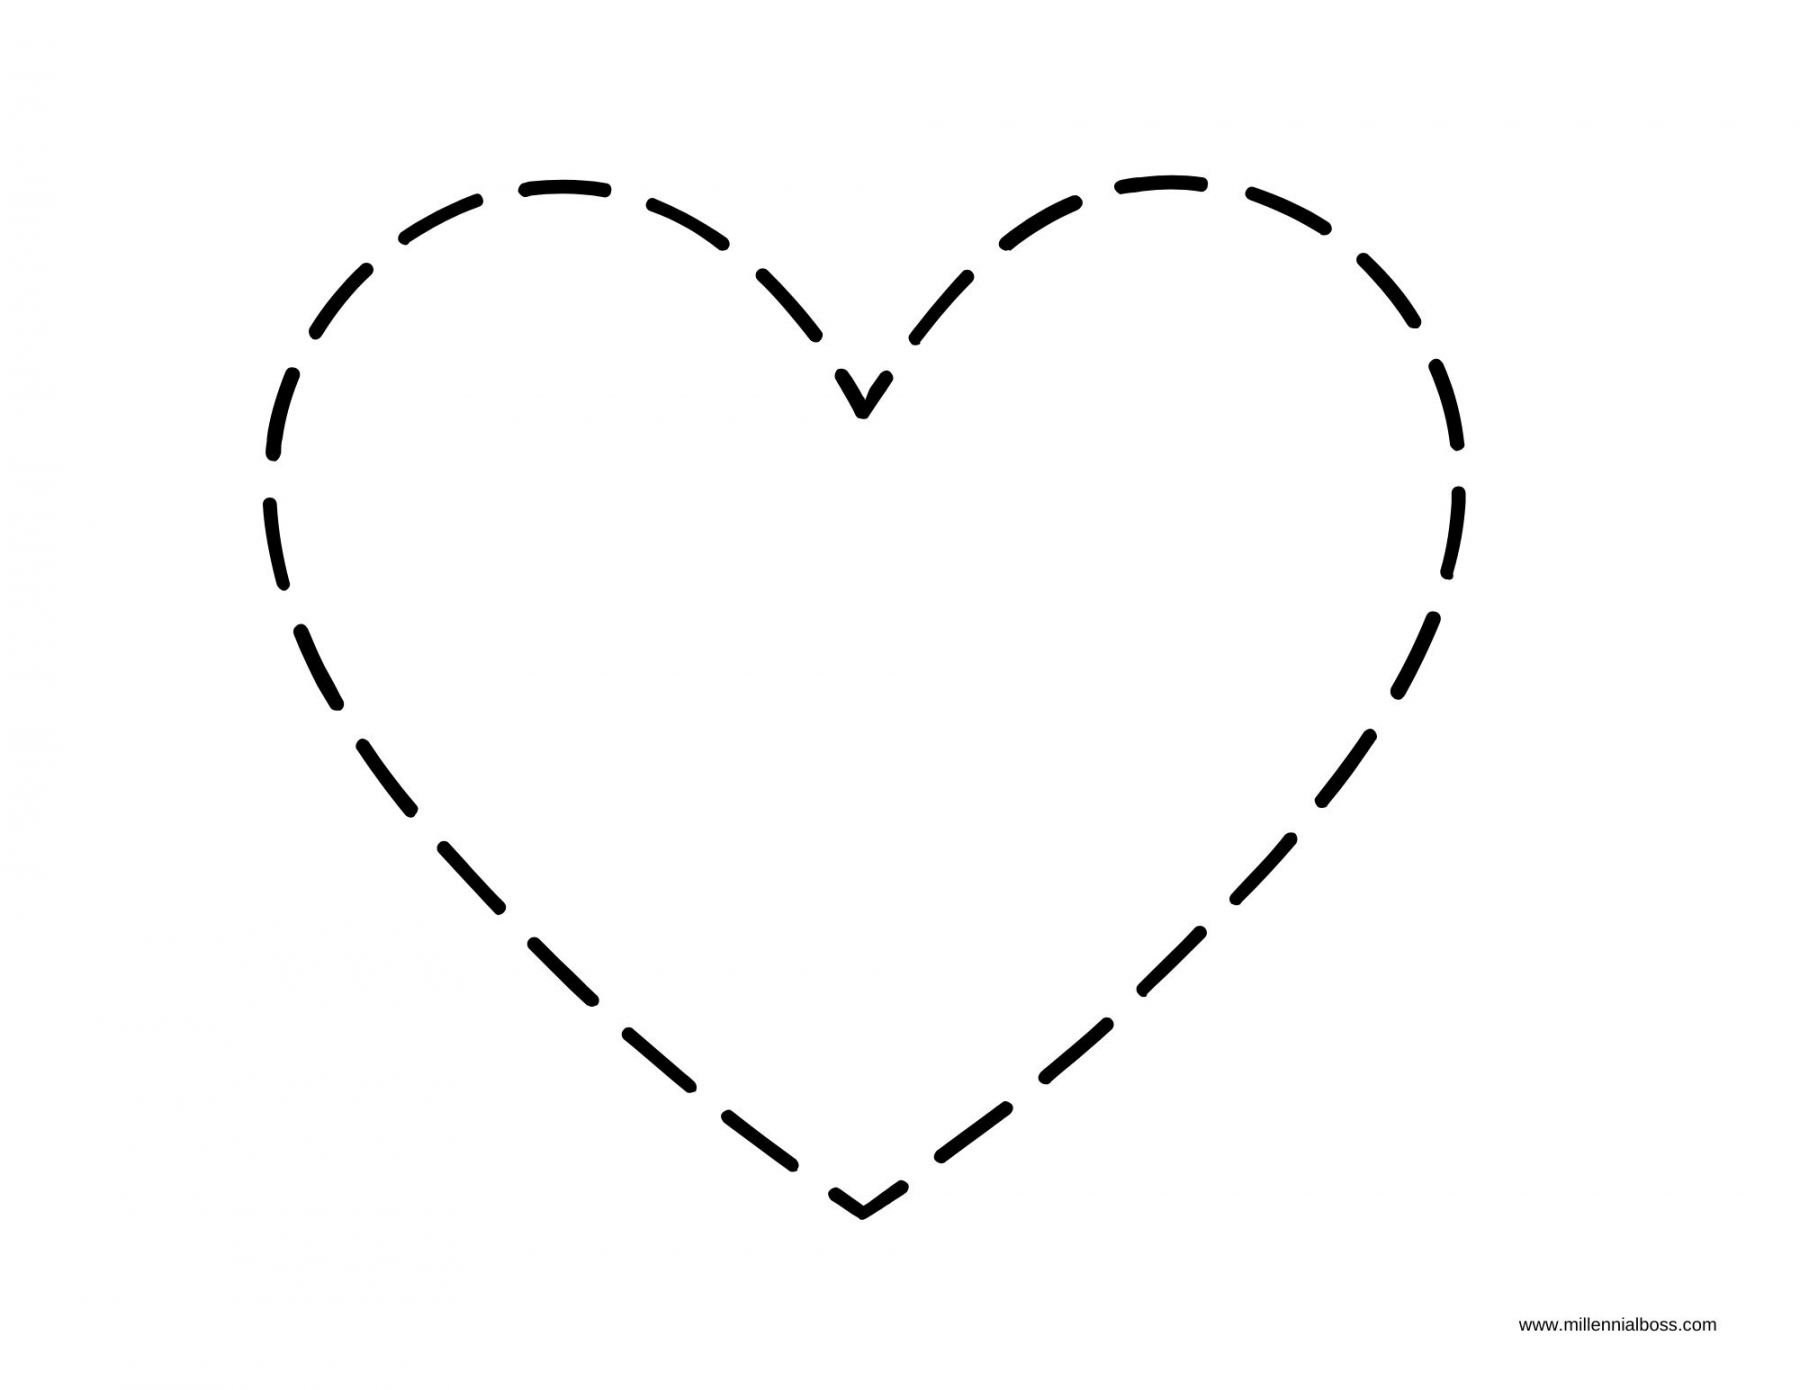 Heart Template Printable Free - Printable - Free Heart Templates pdf in all different sizes